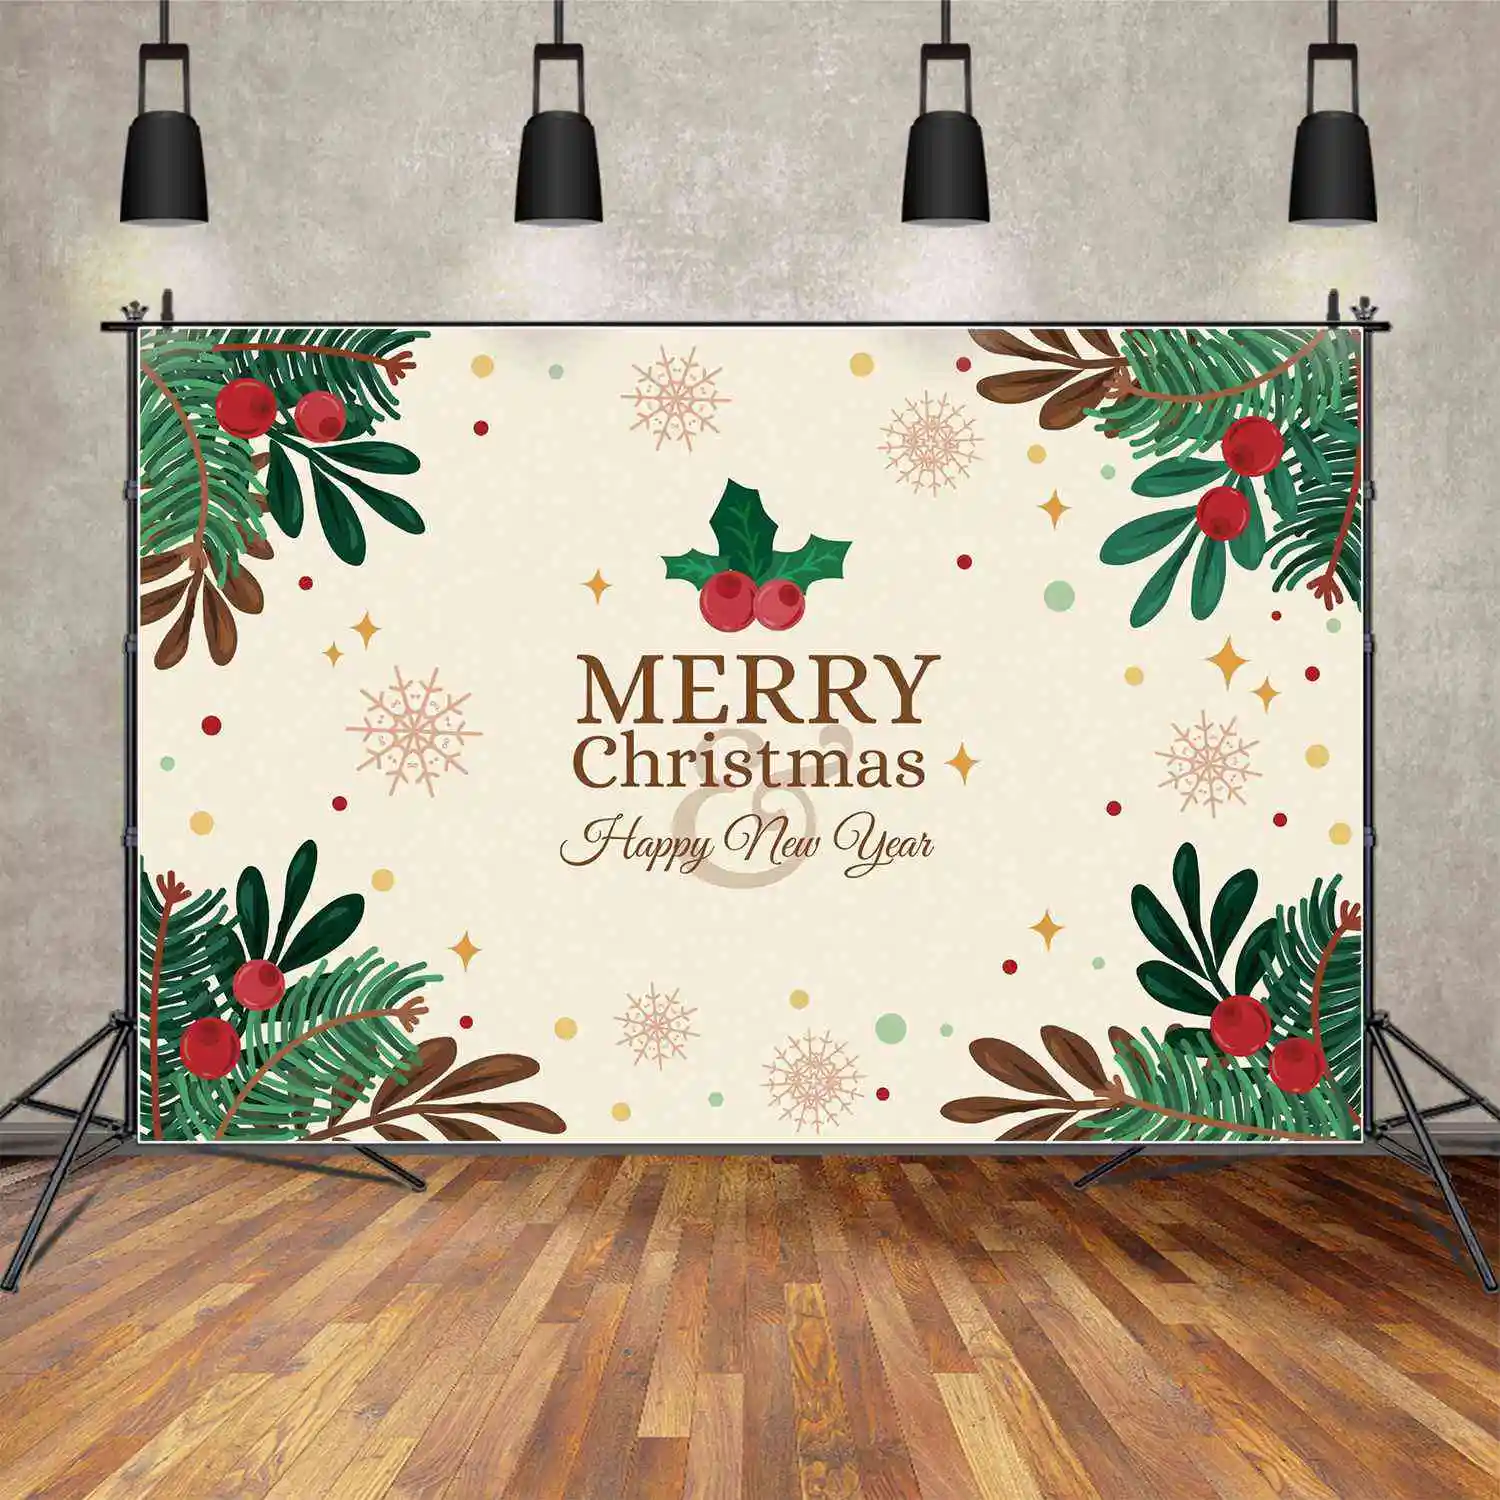 

MOON.QG Backdrop Merry Christmas Banner Children Party Wall Background Red Bean Green Leaves Snowflake Decorations Photo Booth